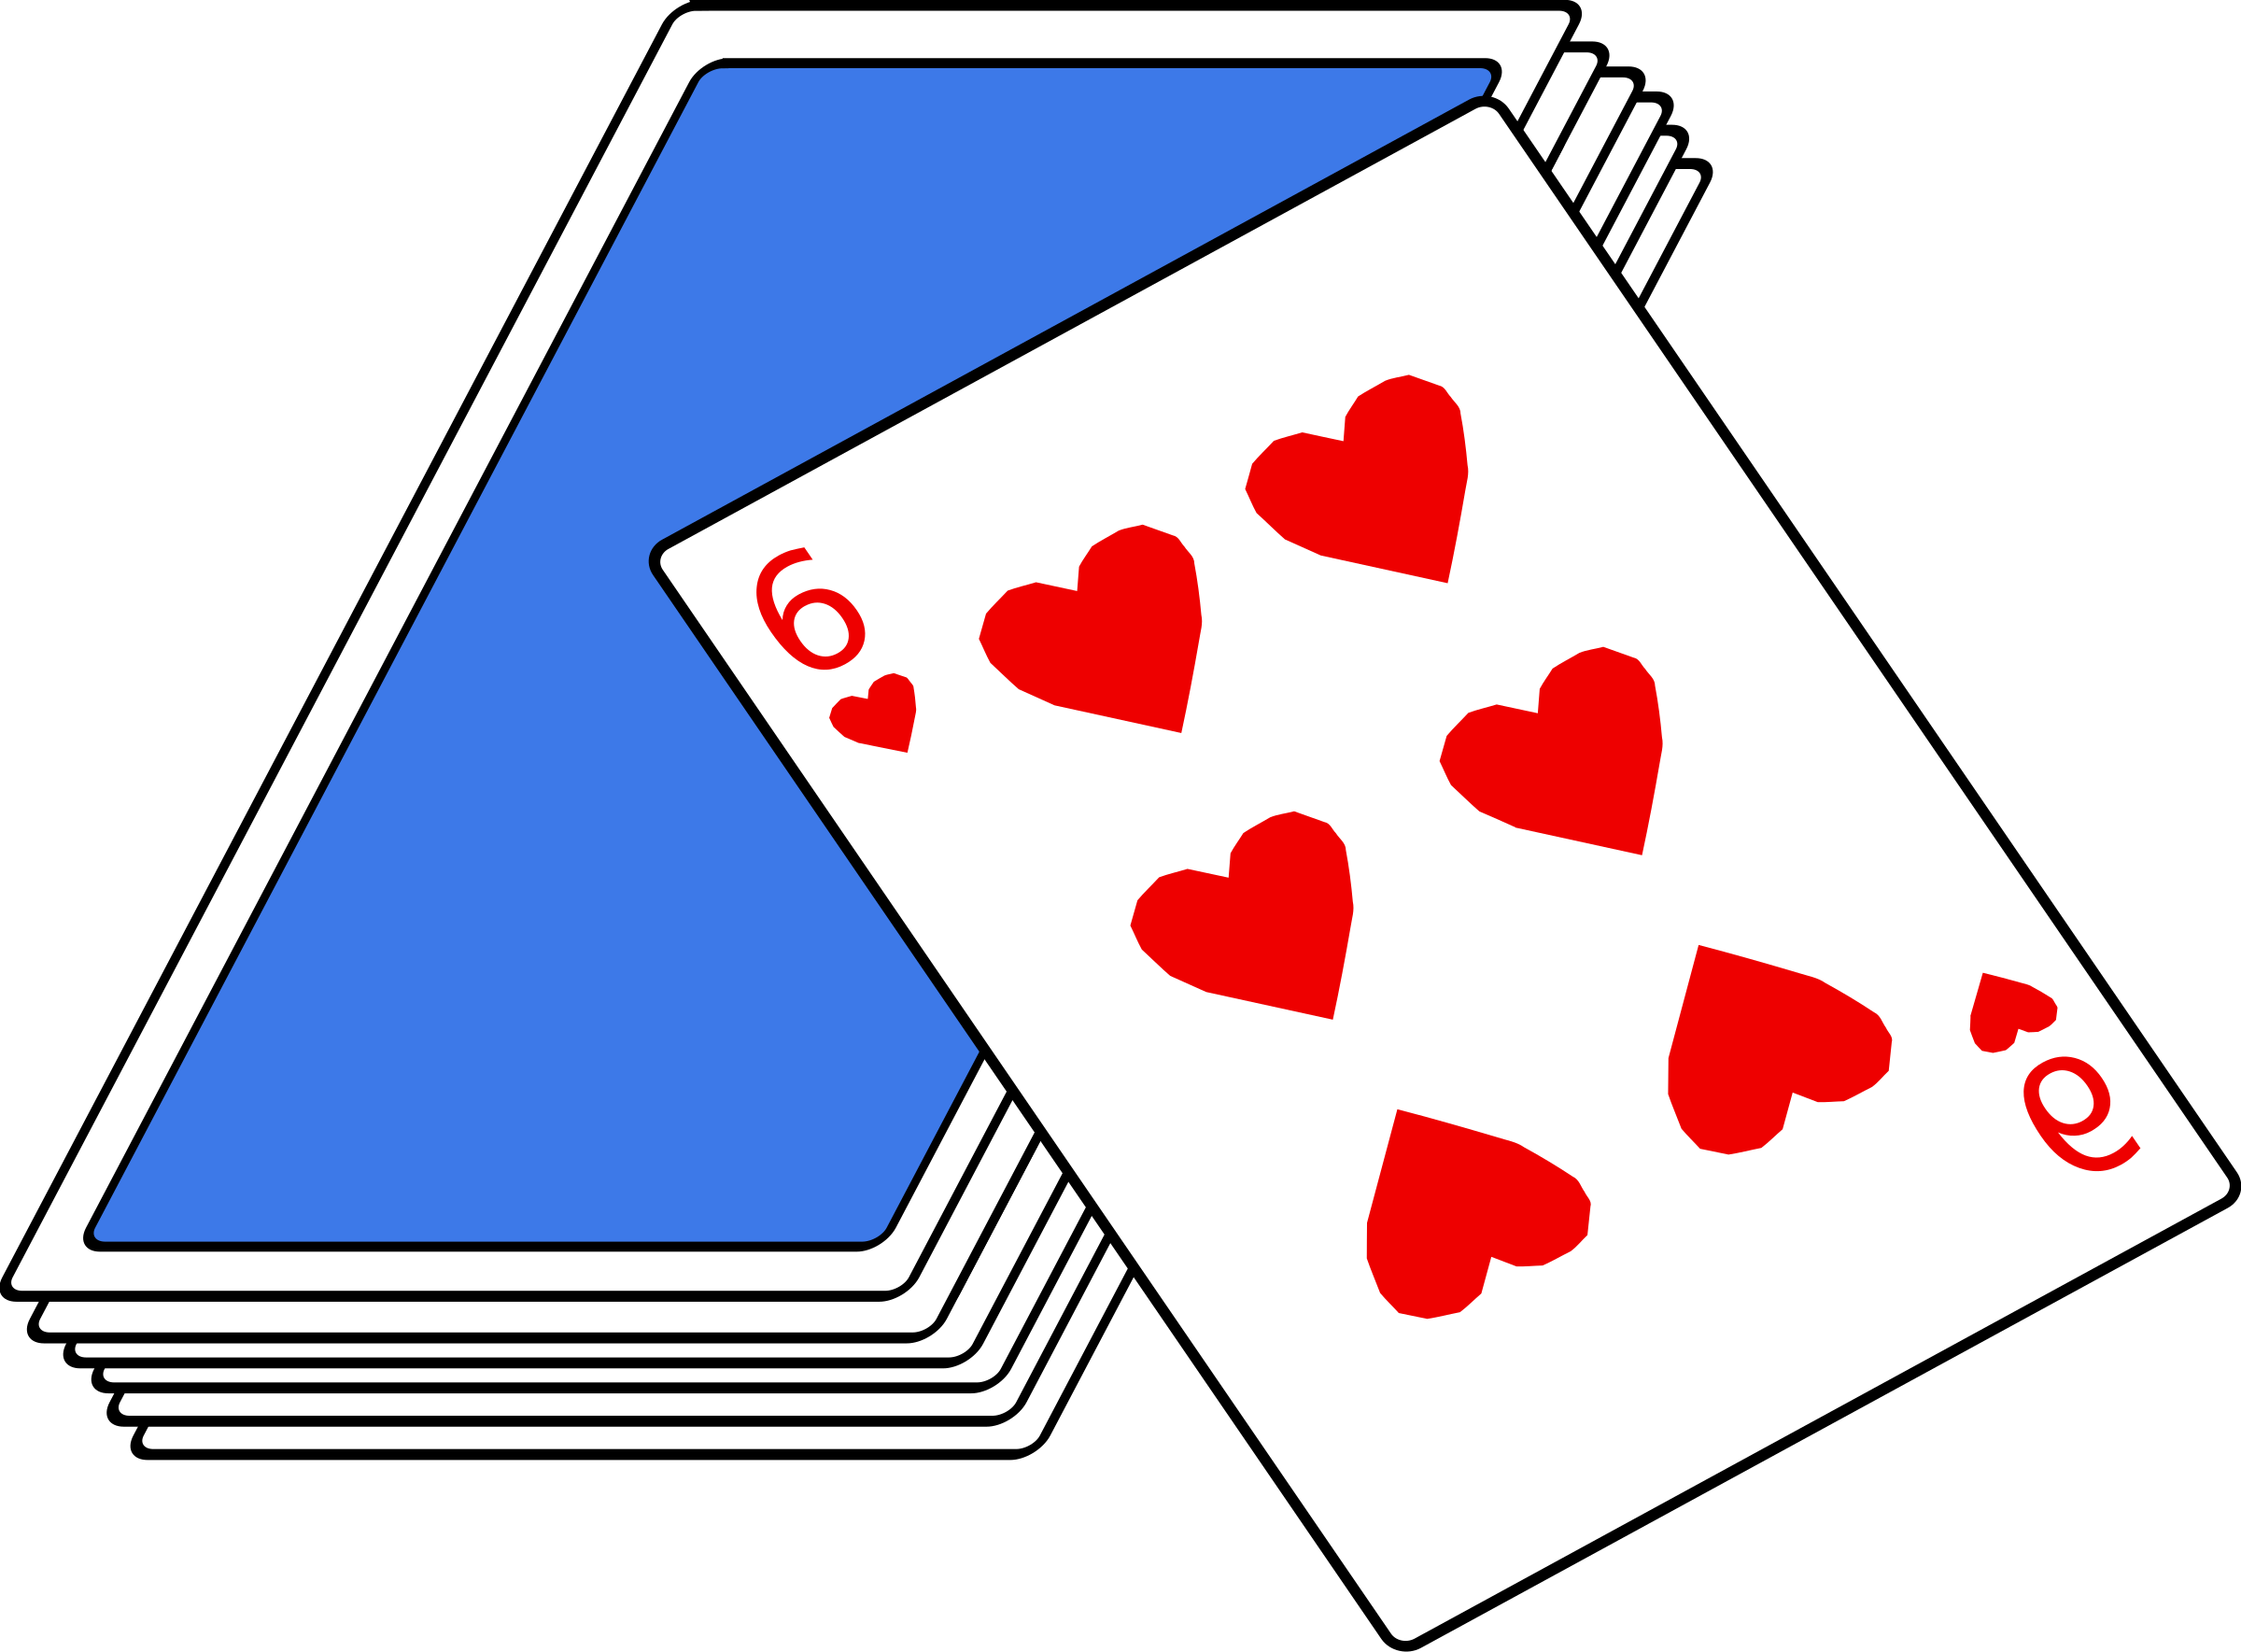 Cards solitaire